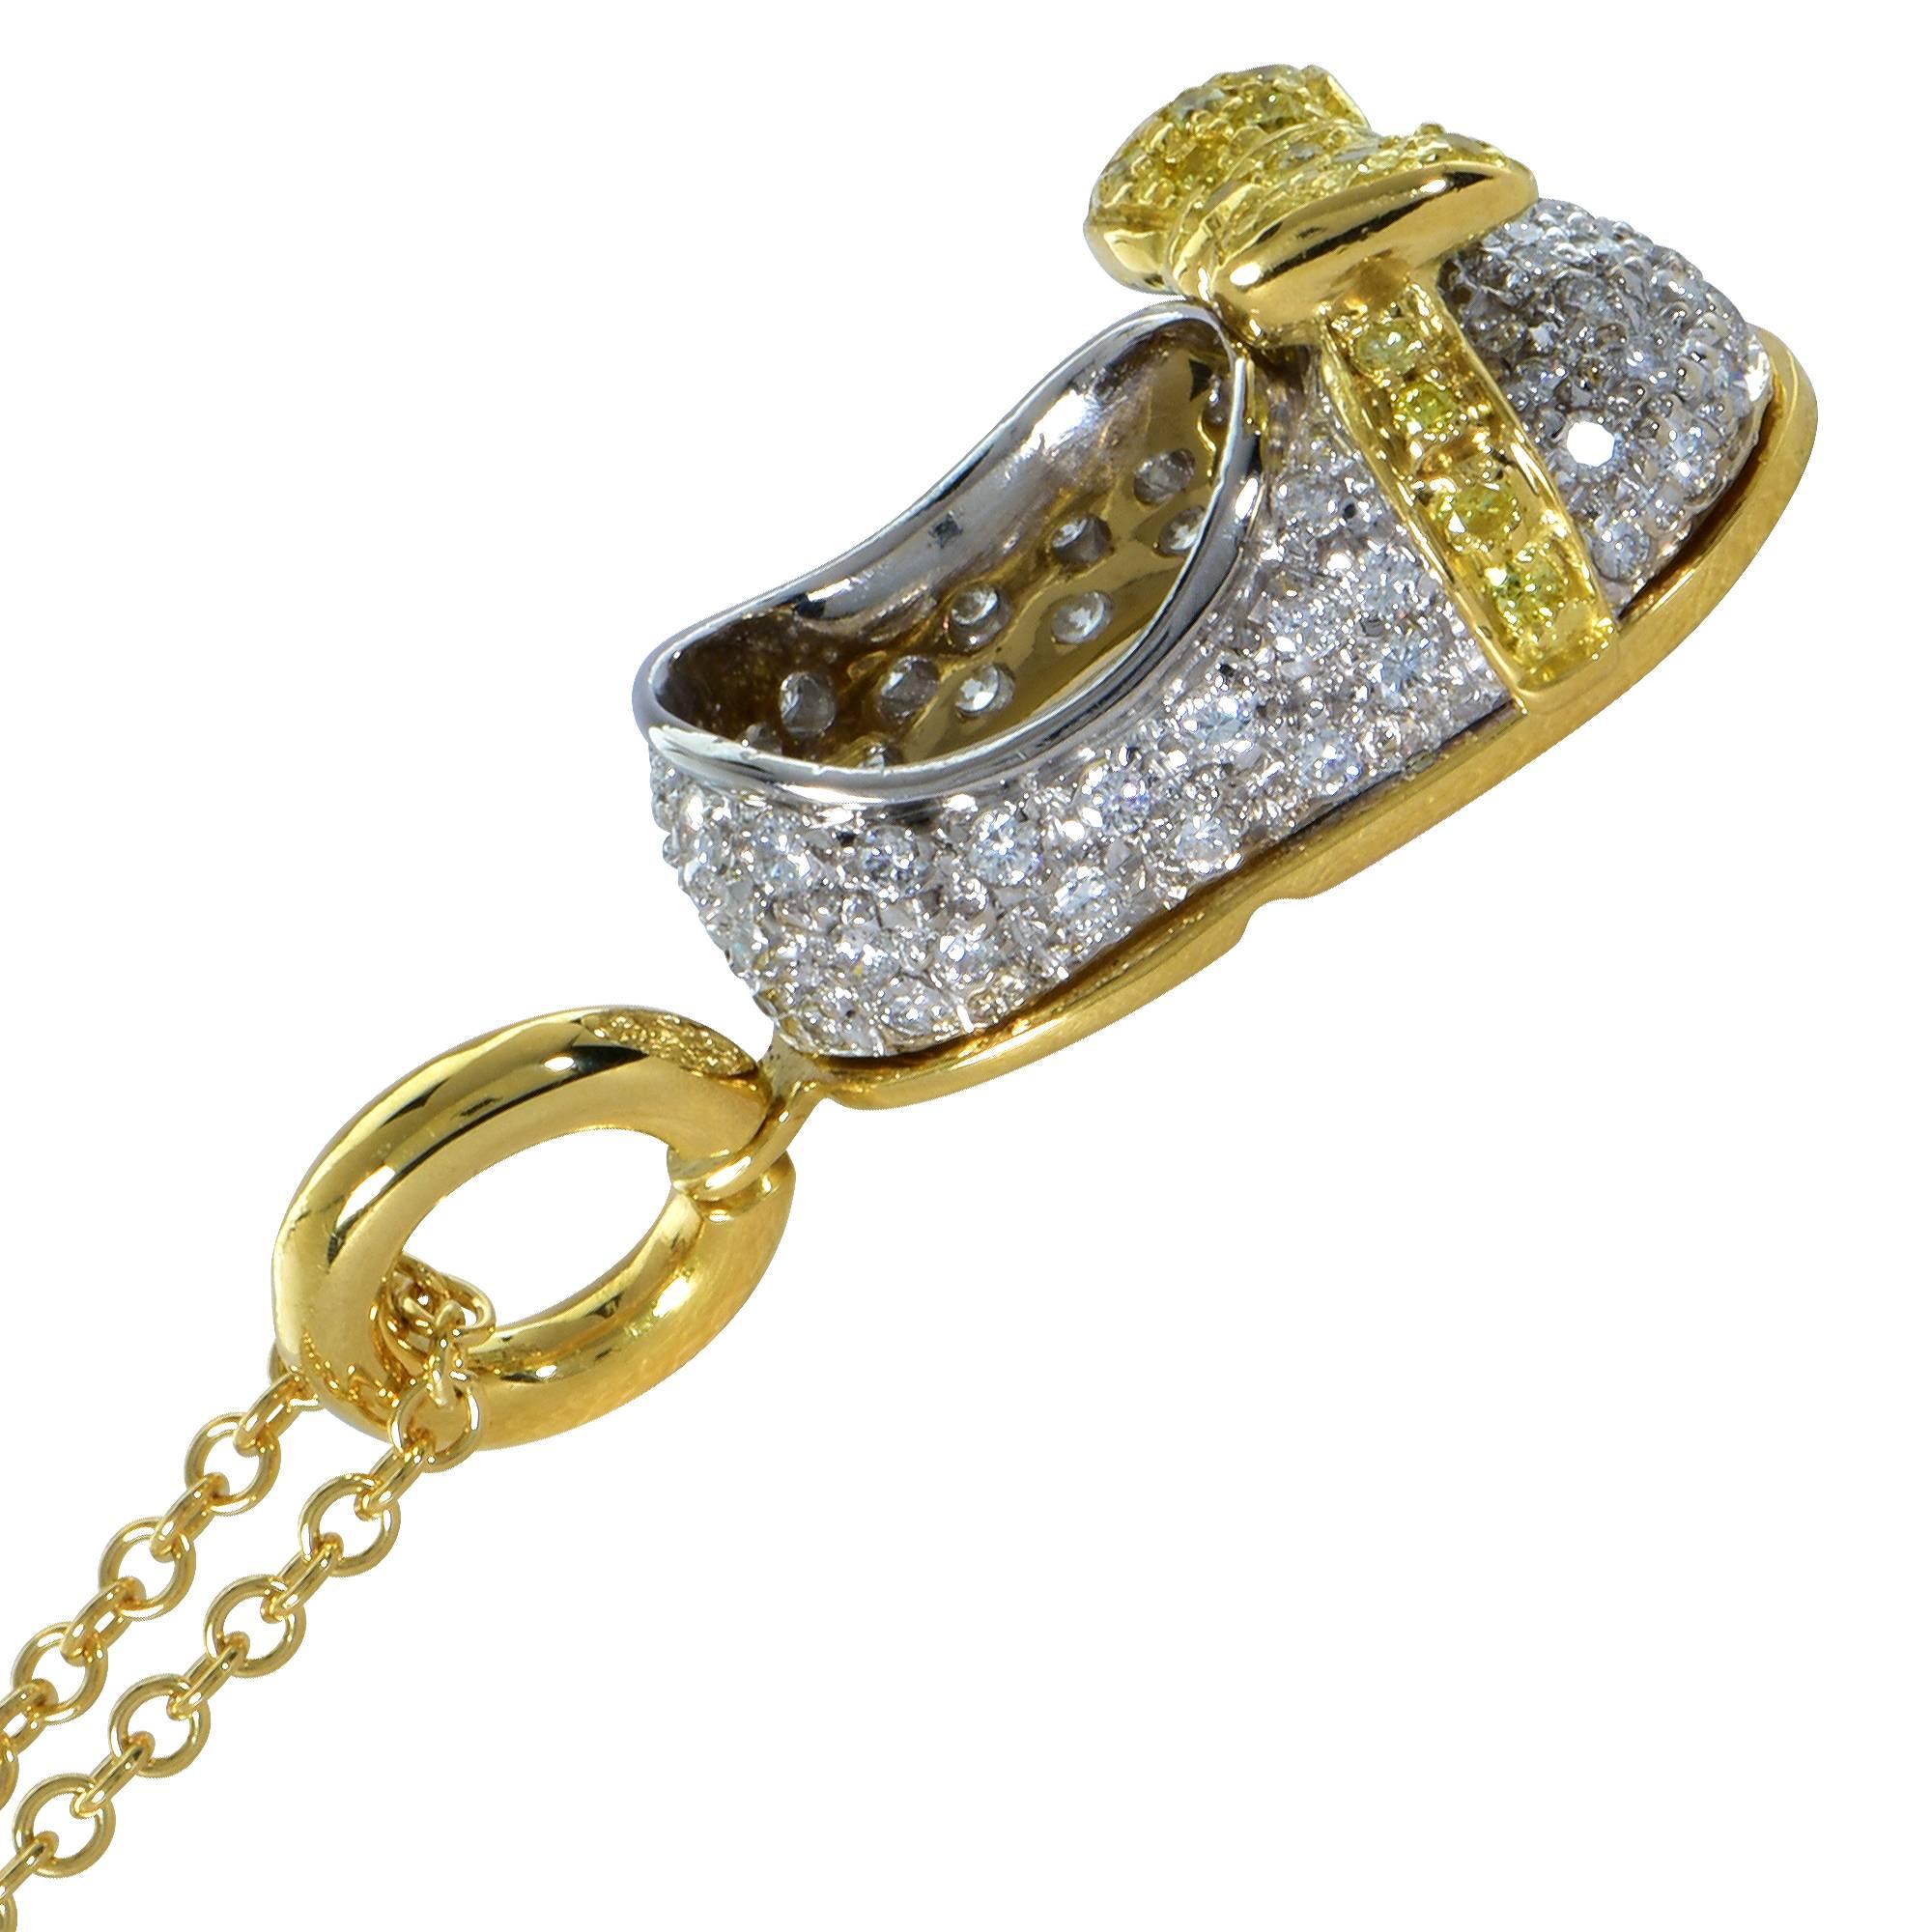 18k white and yellow gold Aaron Basha baby shoe pendant featuring 95 round brilliant cut diamonds weighing approximately 1ct total G color VS clarity and fancy yellow VS diamonds.

Measurements are available upon request.
It is stamped and/or tested